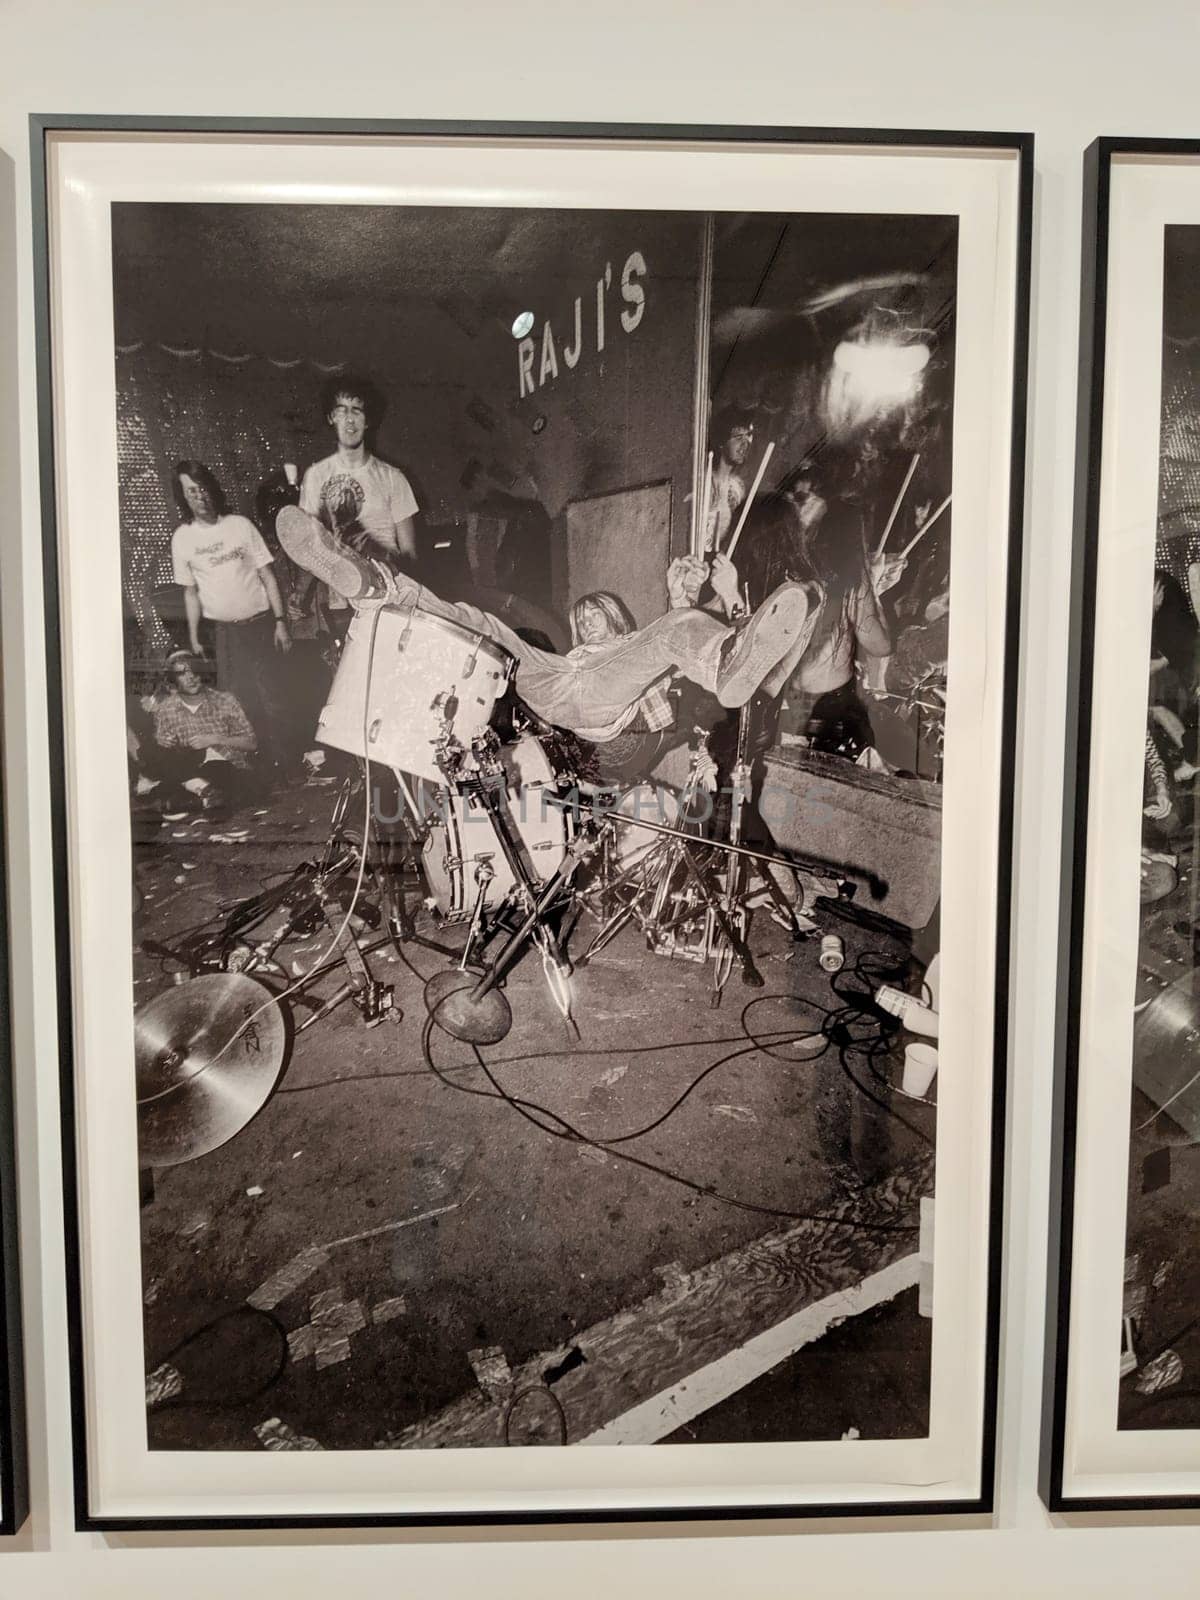 Seattle - May 16, 2019:  American grunge rock band Nirvana performing live at Raji's photo displayed at the Seattle Art Museum. The photo shows lead singer and guitarist Kurt Cobain, bassist Krist Novoselic, and drummer Dave Grohl on stage.  The photo is framed by a white mat and a black metal frame.